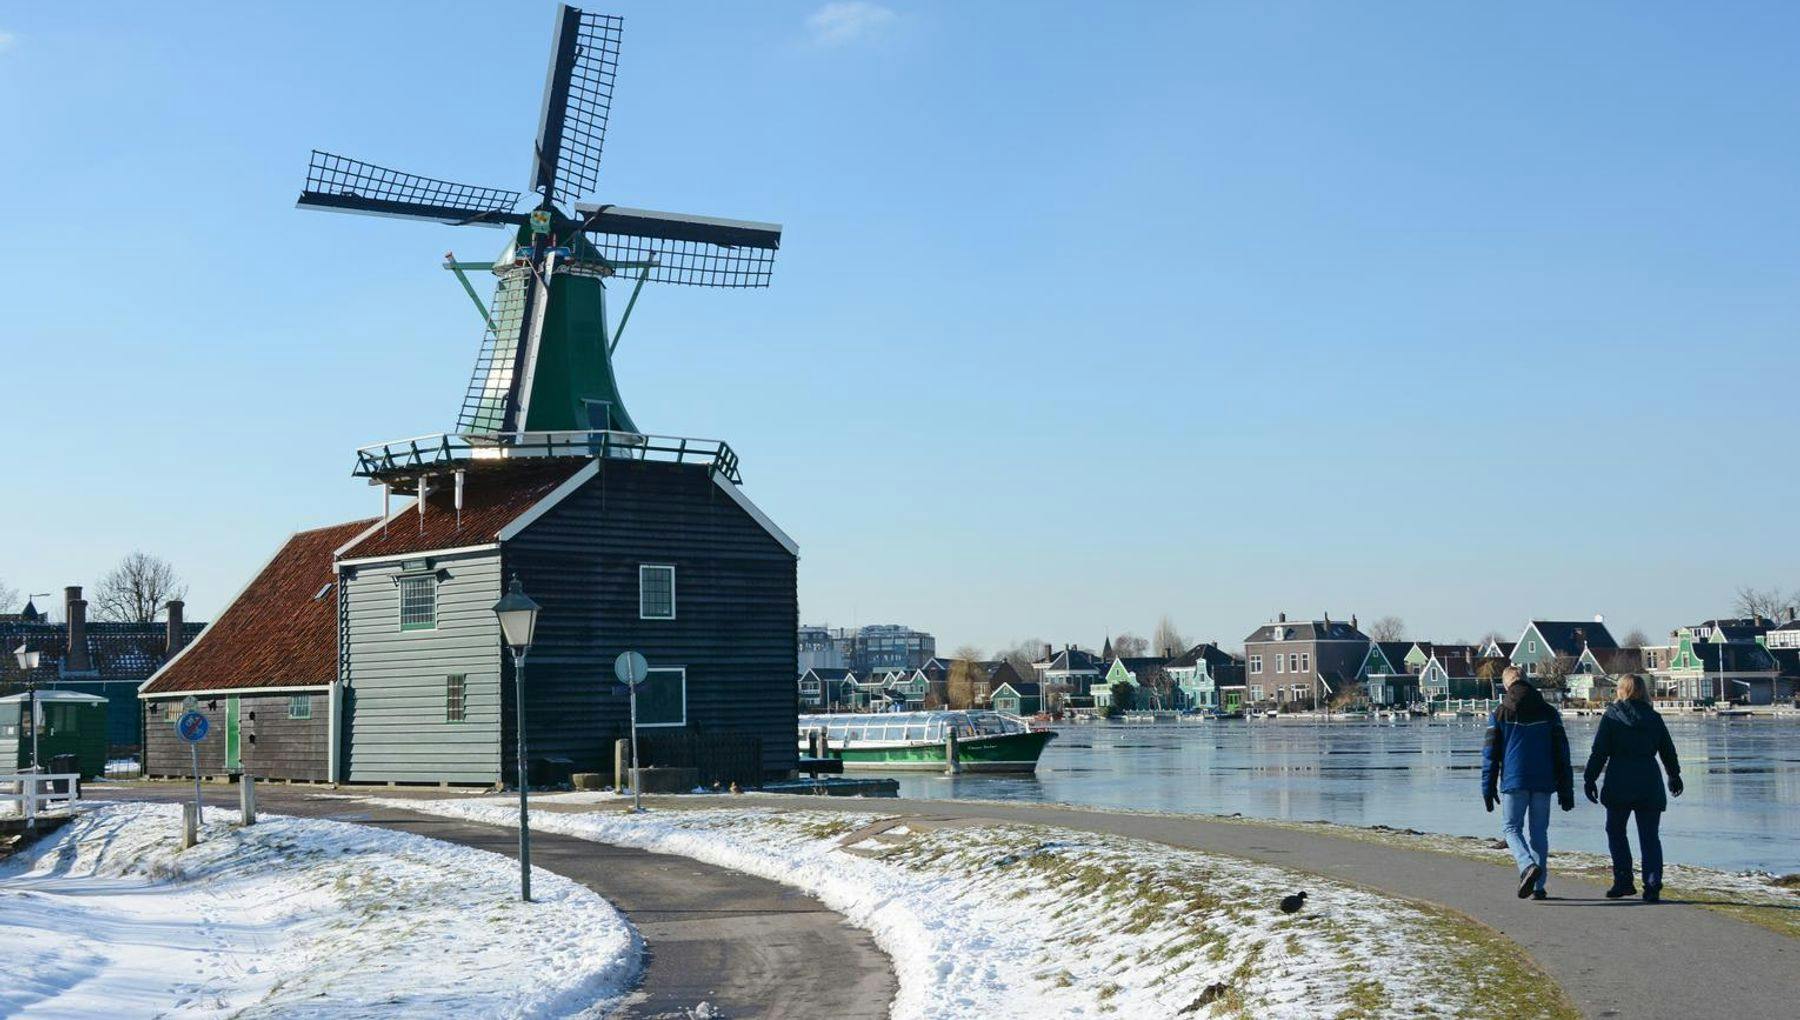 A couple is walking on a sunny day in the winter at the Zaanse Schans.